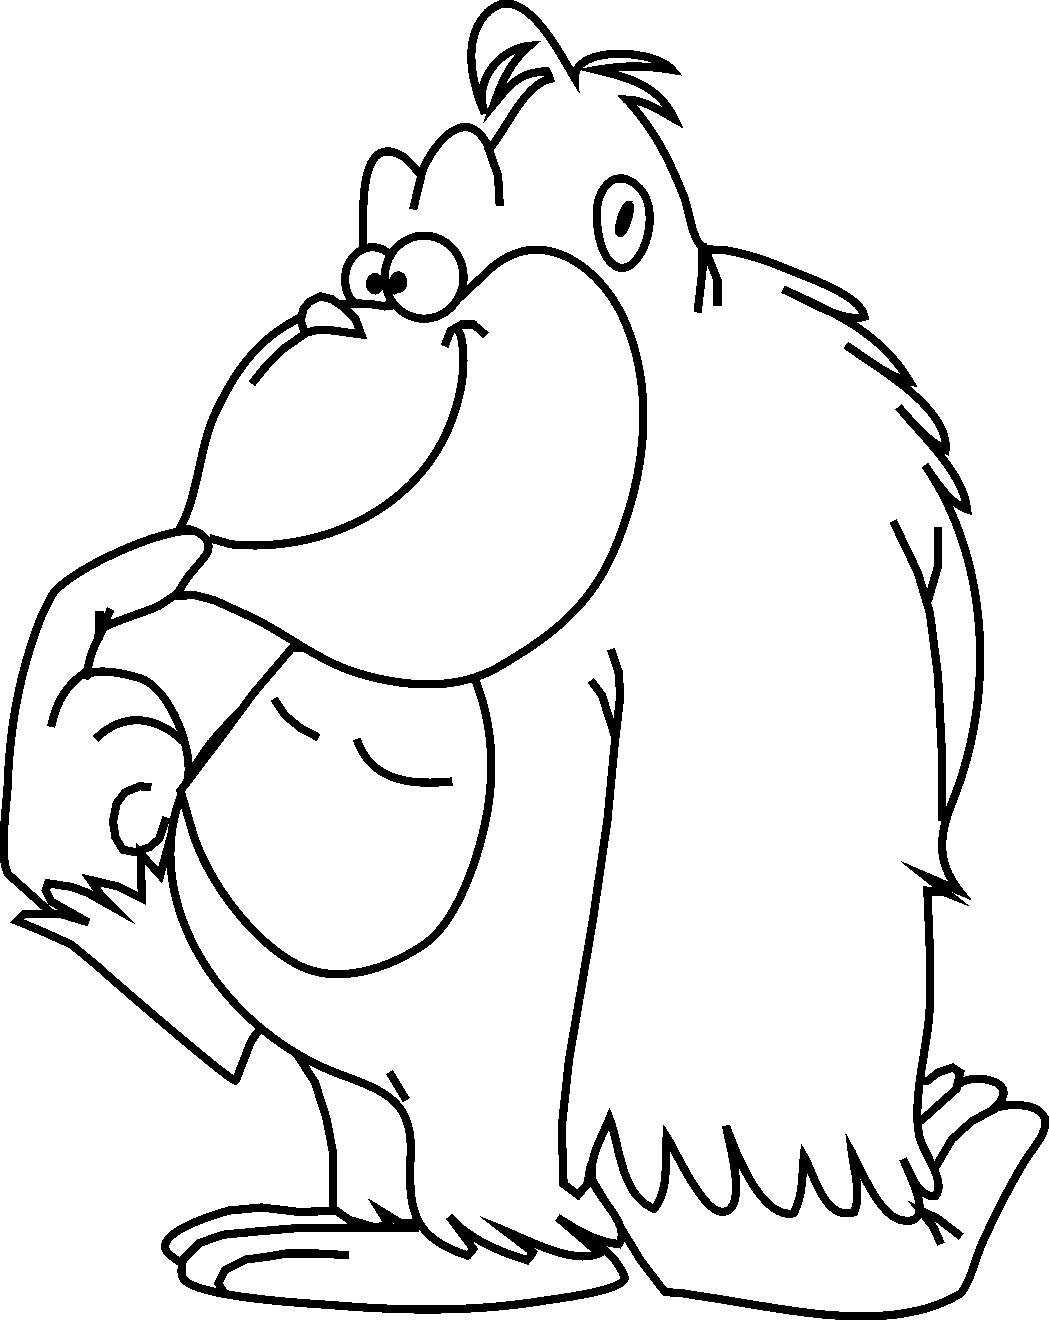 free-printable-coloring-pages-cartoon-animals-download-free-printable-coloring-pages-cartoon